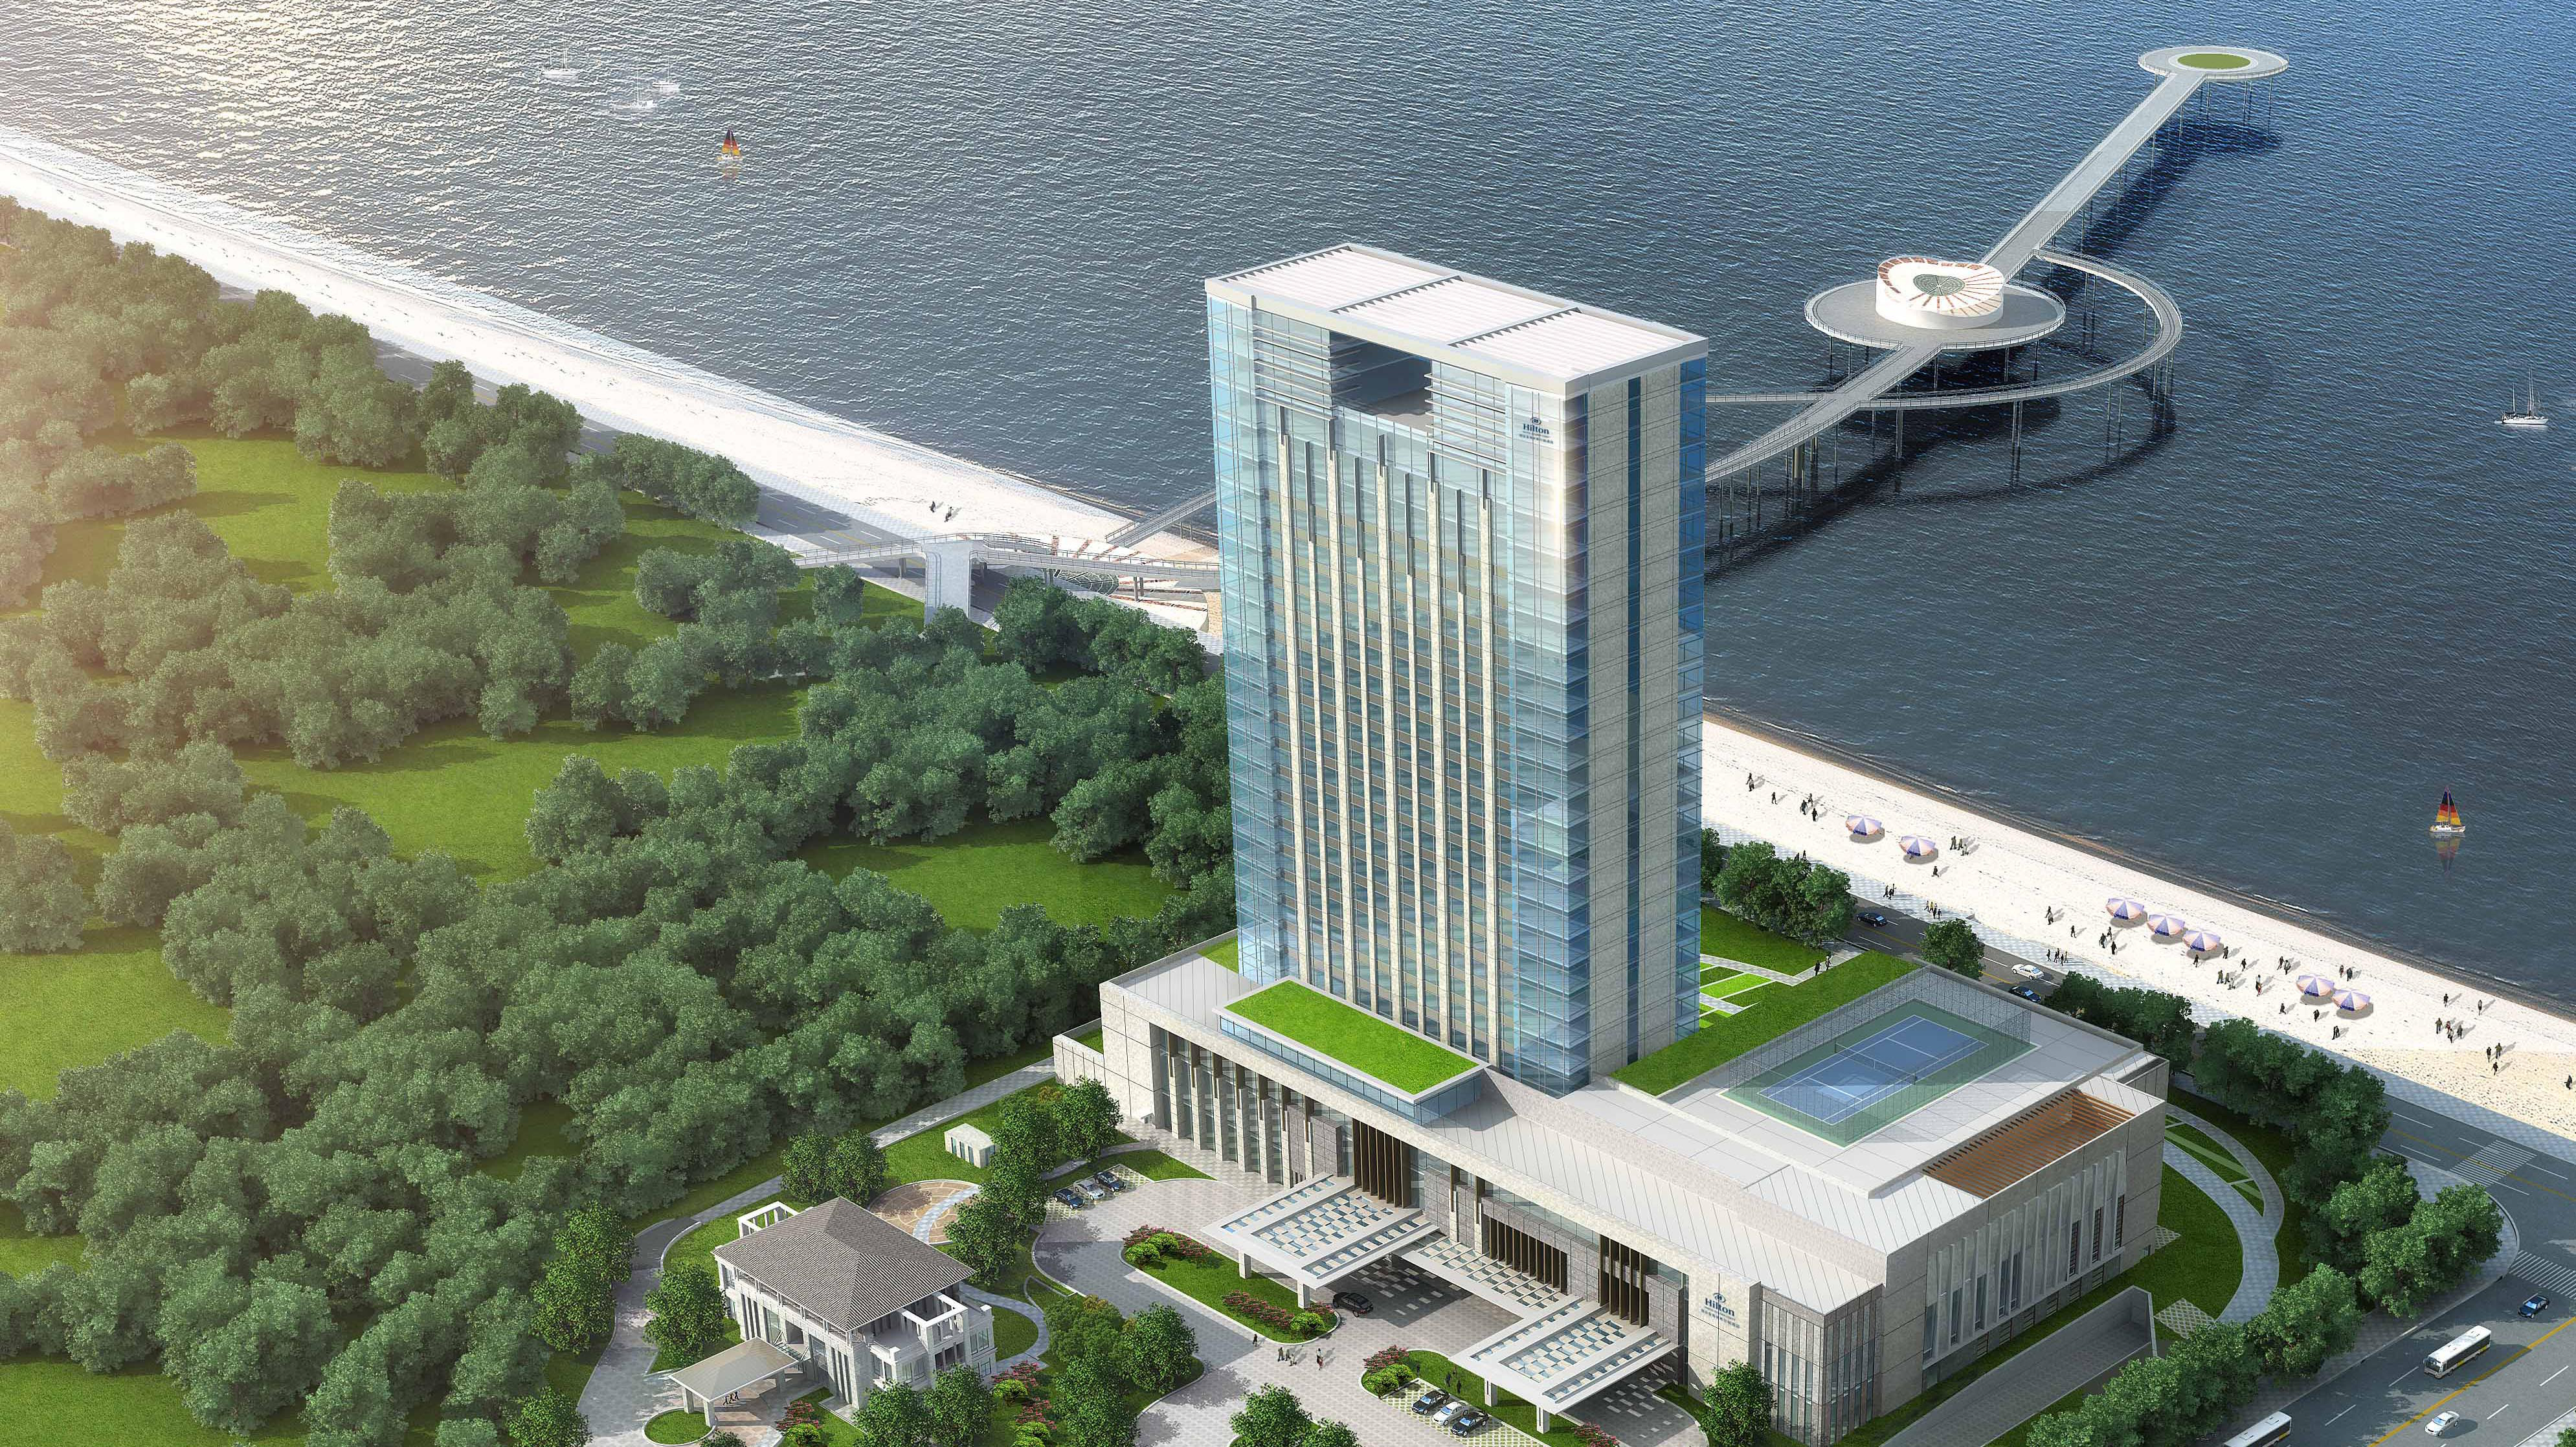 Hilton Yantai is just steps away from Golden Beach